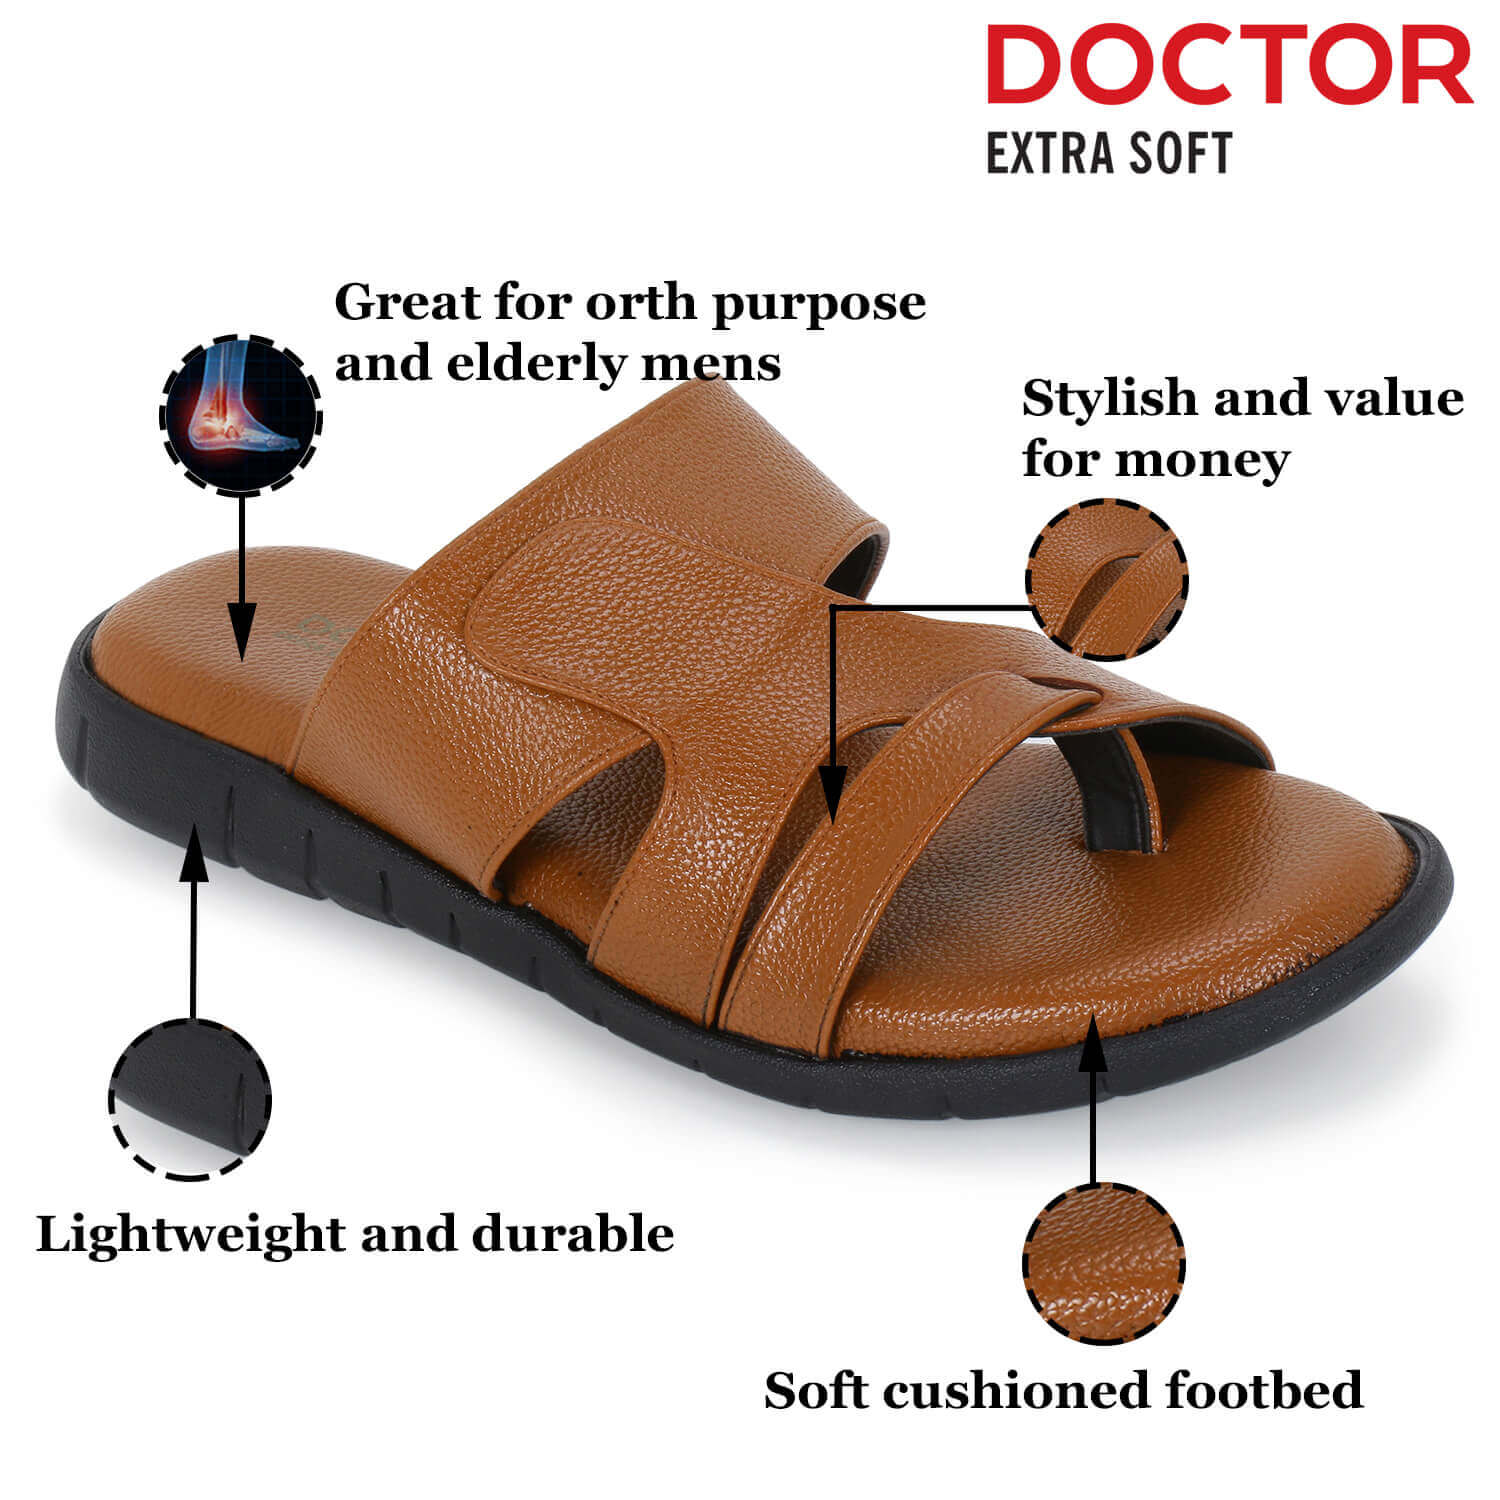 DOCTOR EXTRA SOFT Women's Slippers/Flip-flops OR-D-18 Anti-Skid & Preg –  Doctor Extra Soft